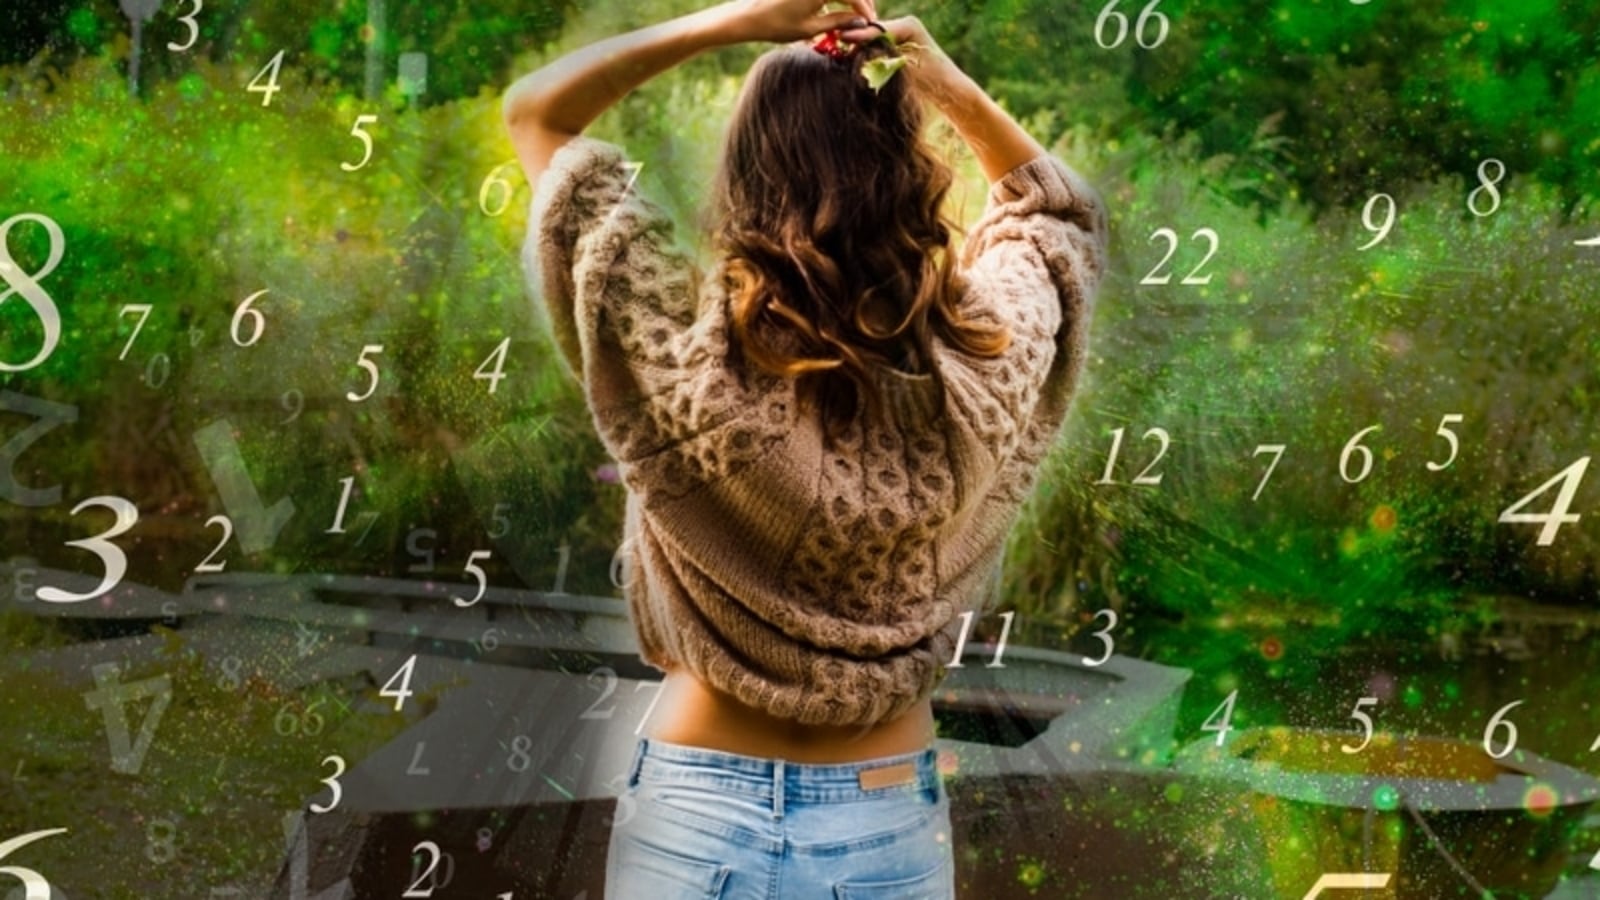 Weekly Numerology Predictions from 27th June to 3rd July, 2022